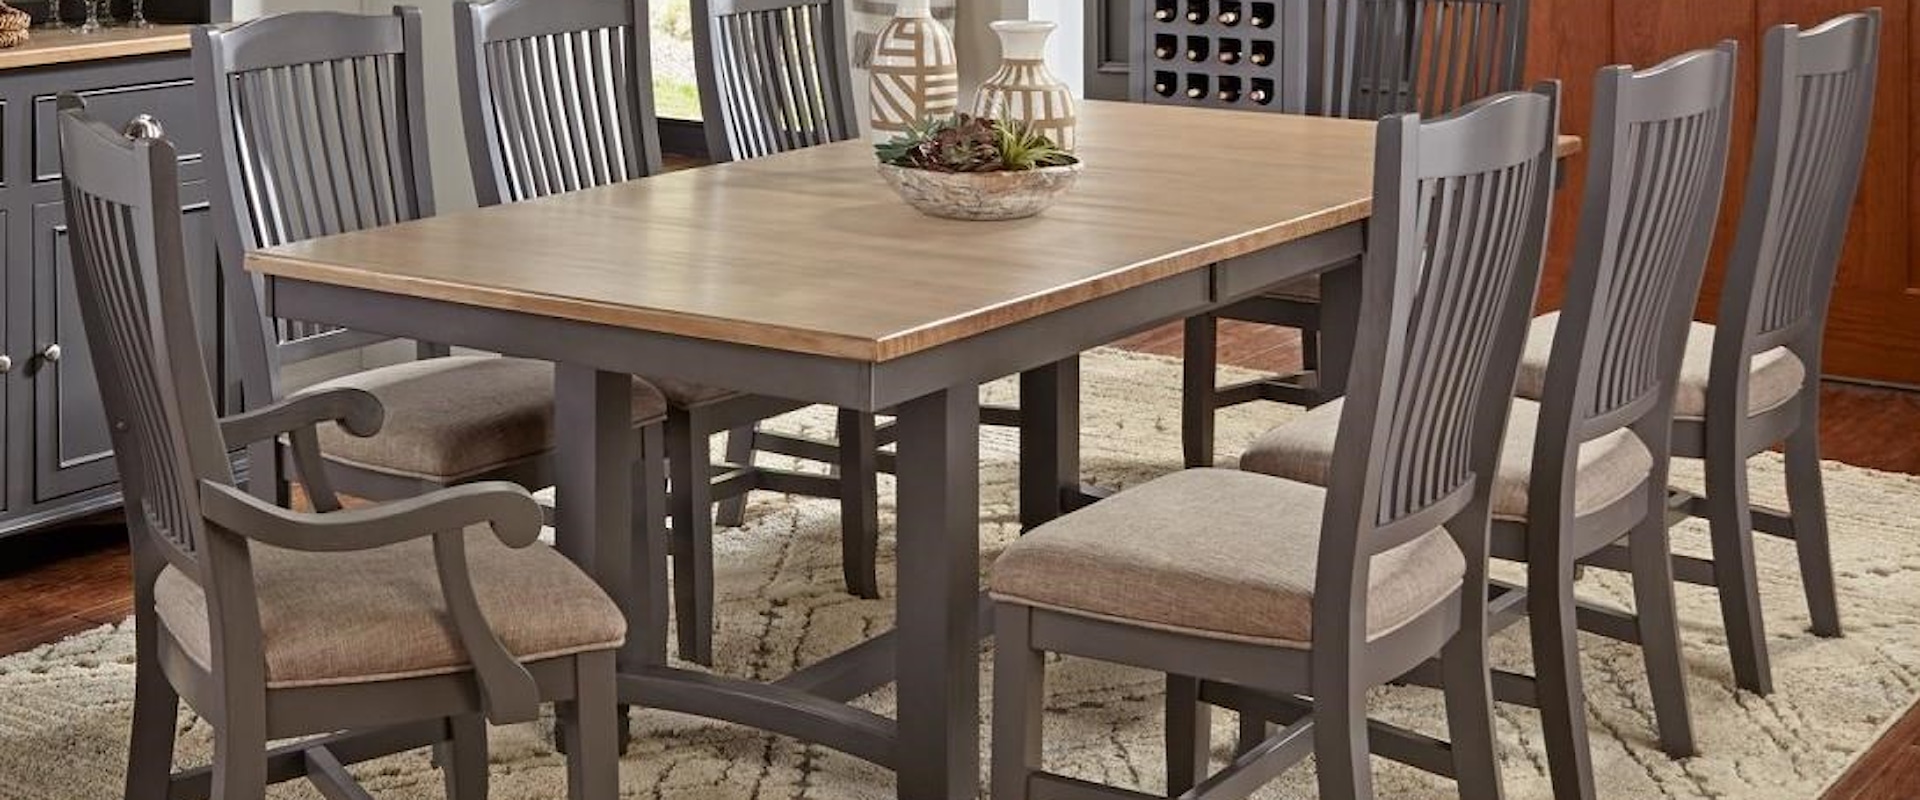 9 Pc Table & Chair Set- (Trestle Table, 6 Upholstered Side Chairs & 2 Upholstered Arm Chairs)